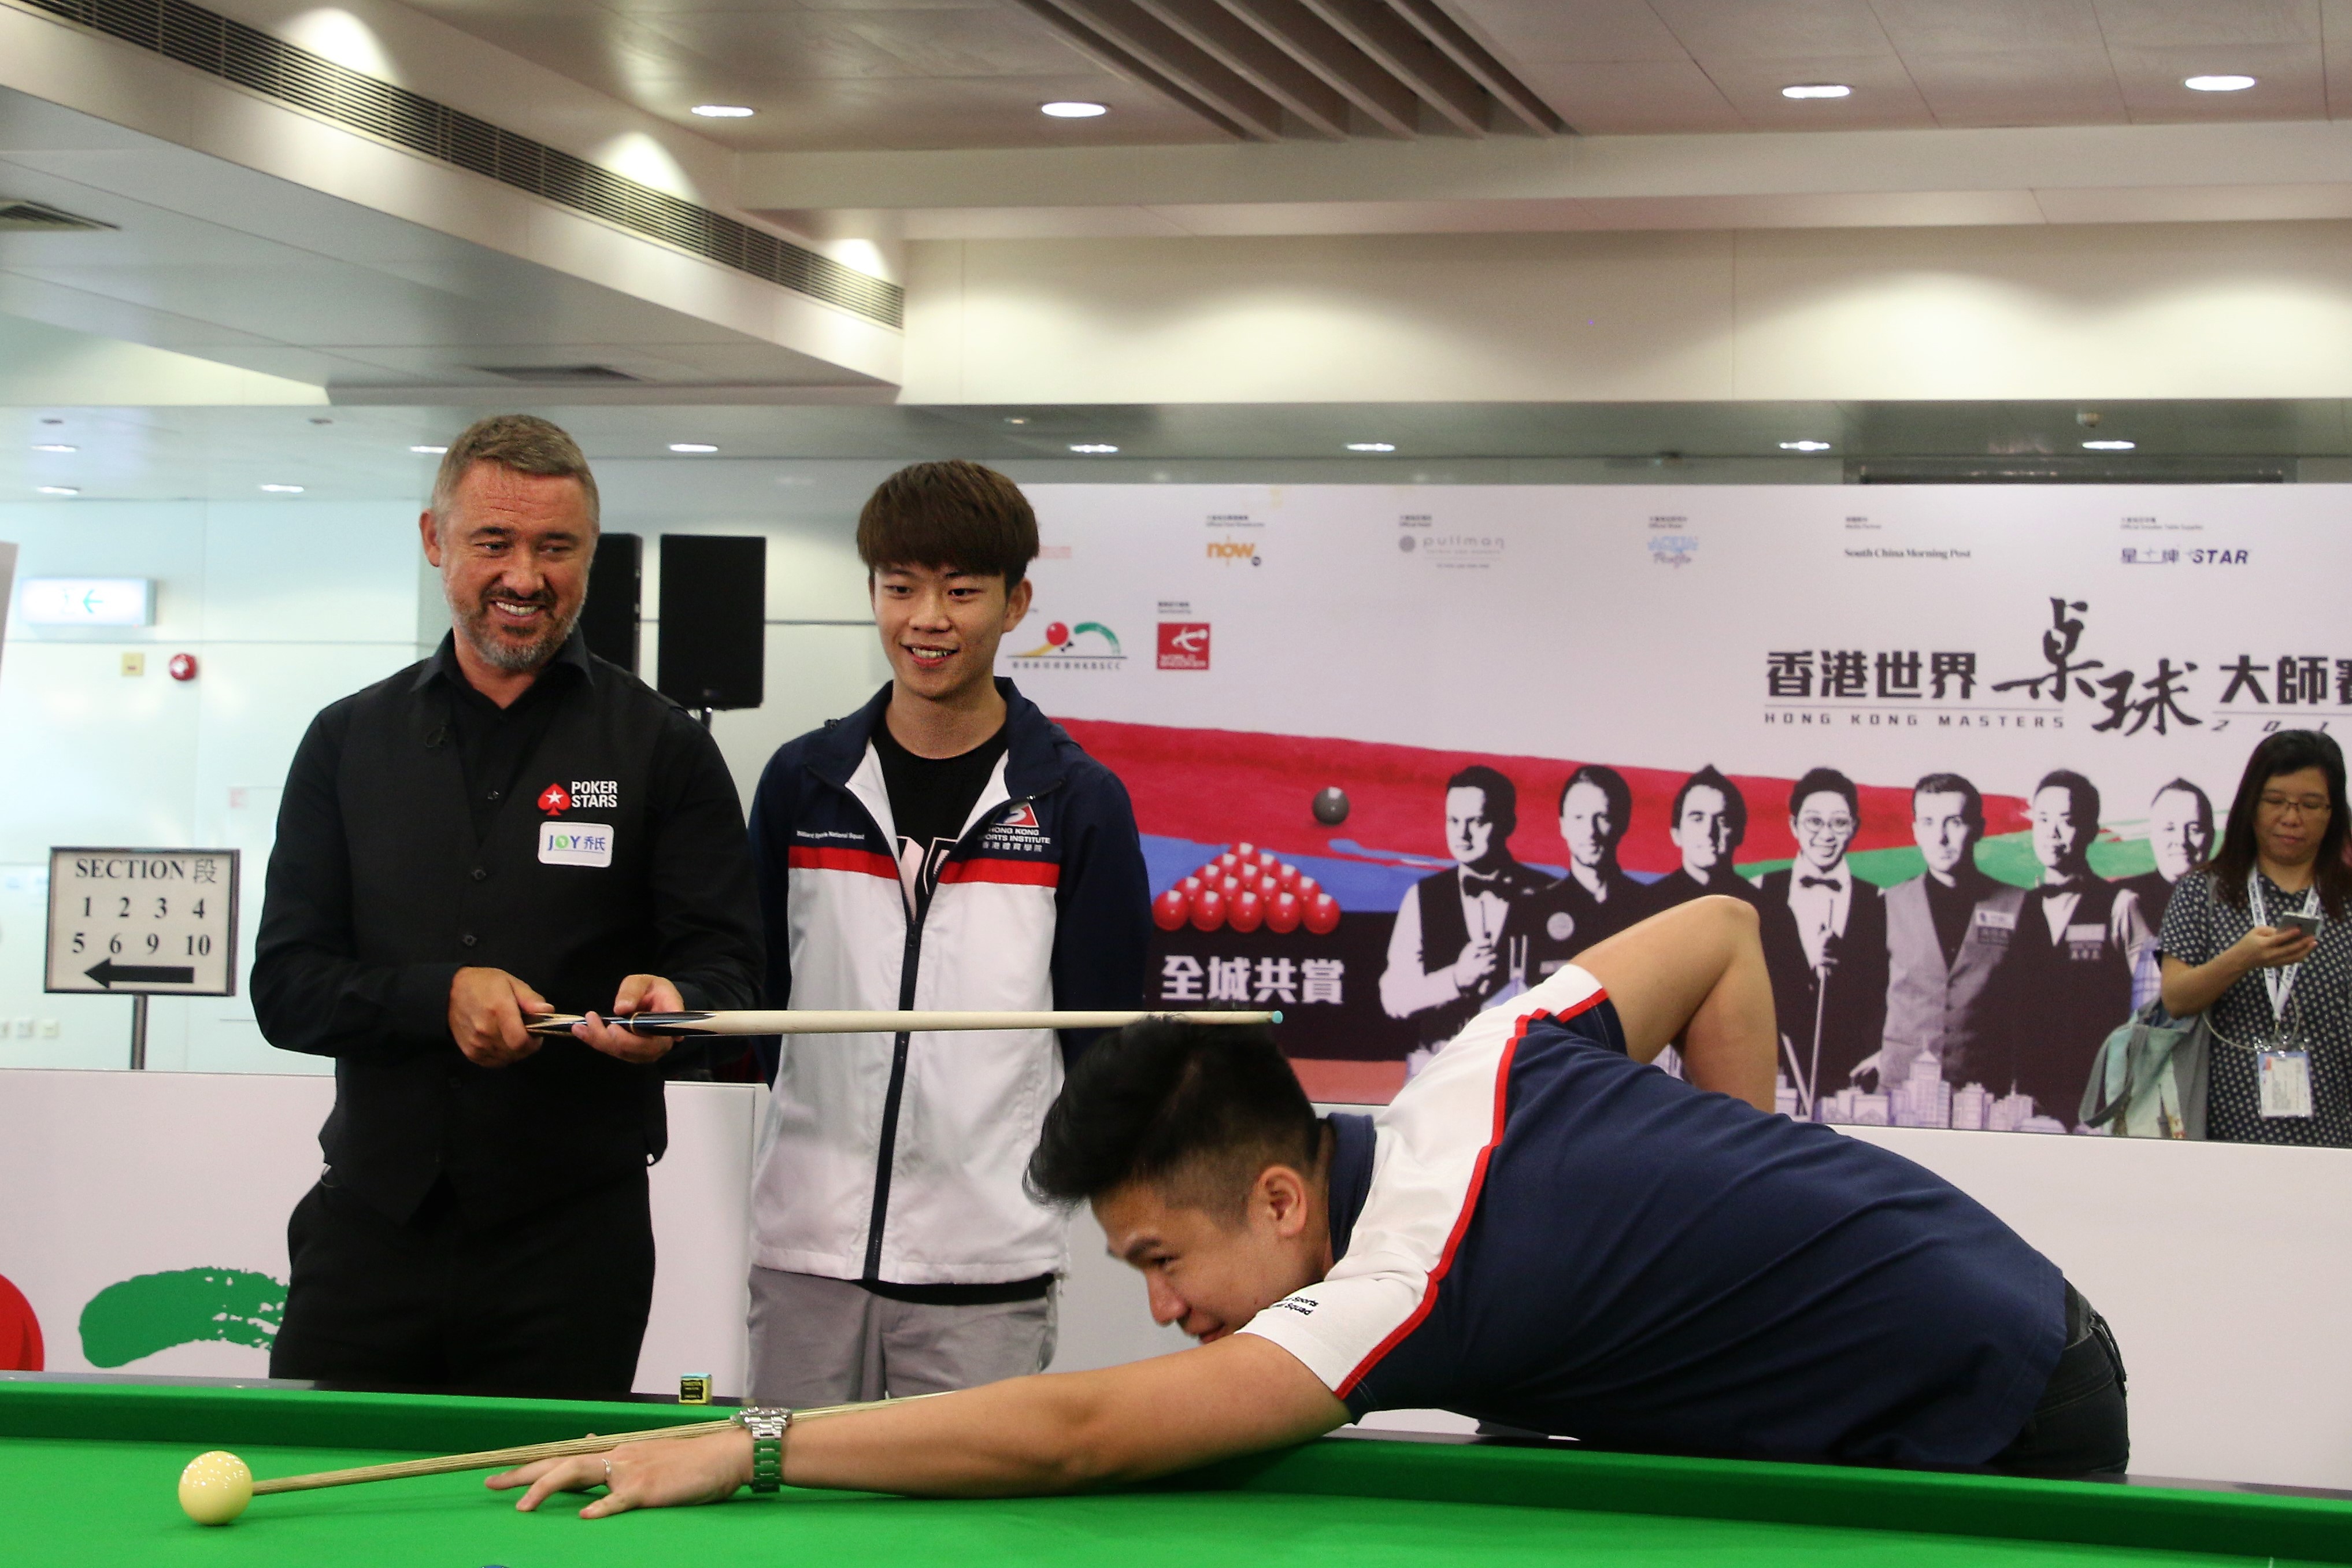 Im impressed Seven-time world snooker champion Stephen Hendry praises Hong Kong team during clinic South China Morning Post